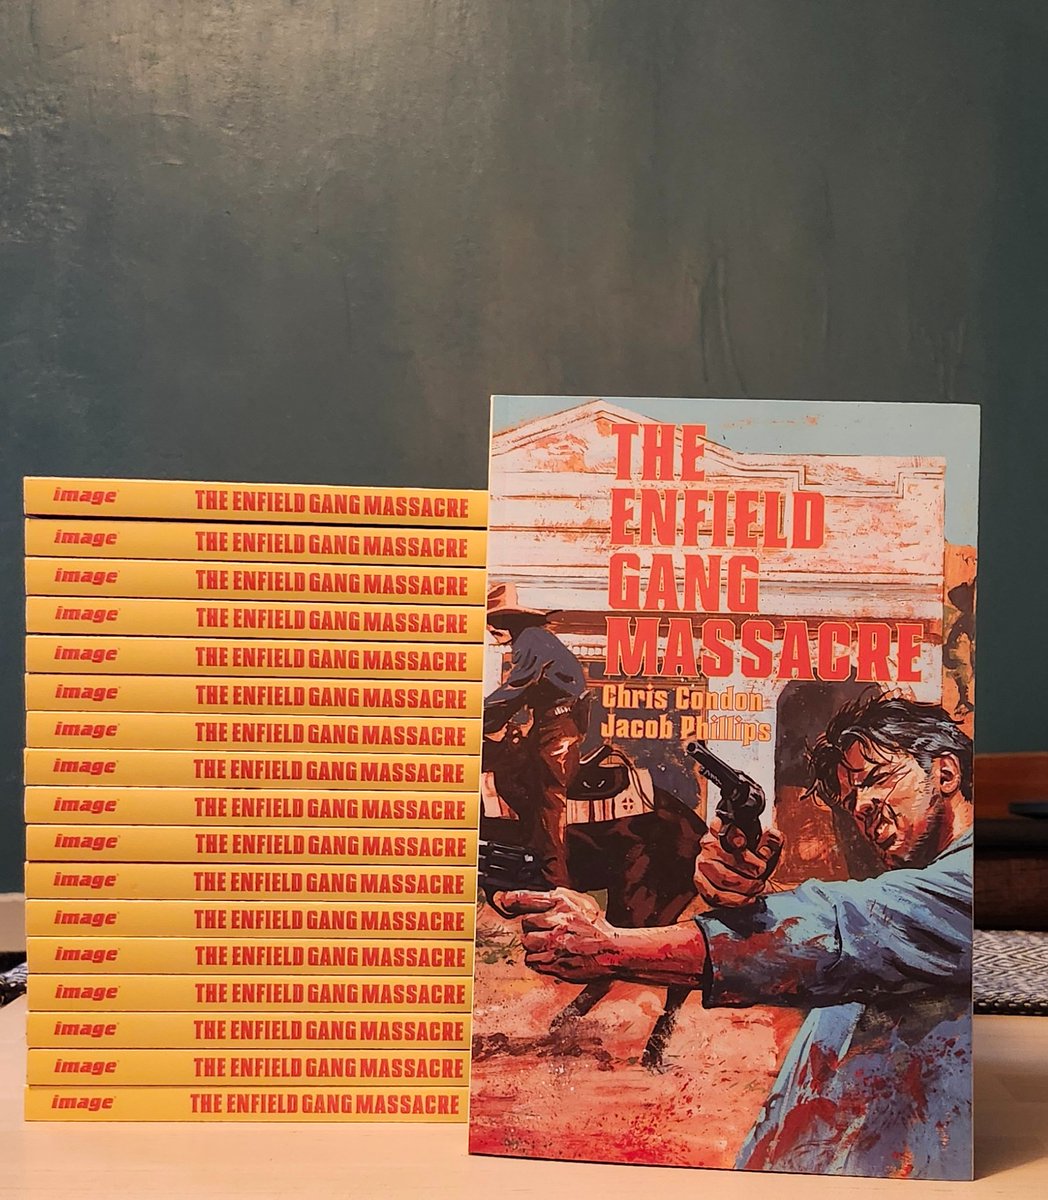 THE ENFIELD GANG MASSACRE trade is out NEXT WEEK but you can make sure to get your hands on a copy by pre-ordering it TODAY. One of the best comics of 2023 according to @THR, @ComicsJournal, @comicsbeat, and @CBR. Printed on newsprint and features a brand-new 6 page story!